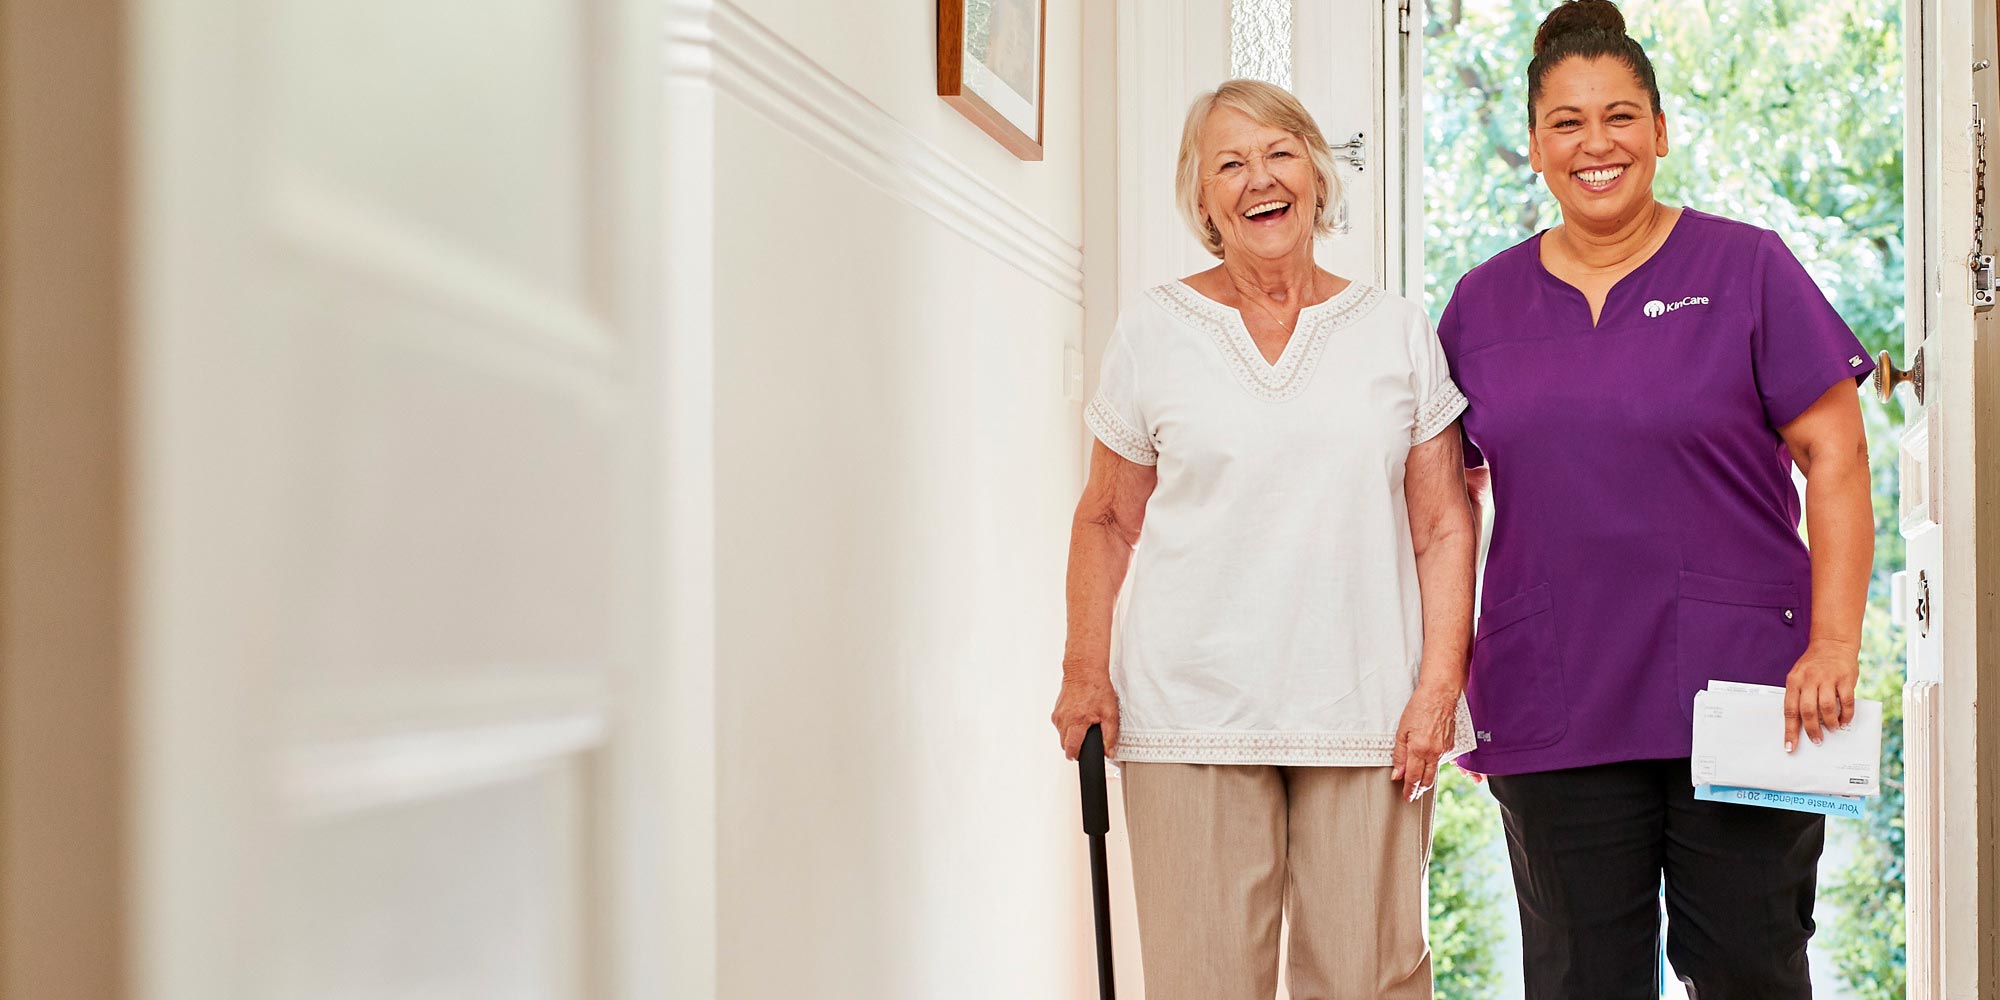 Kincare worker assisting elderly woman with walking stick smiling and walking together